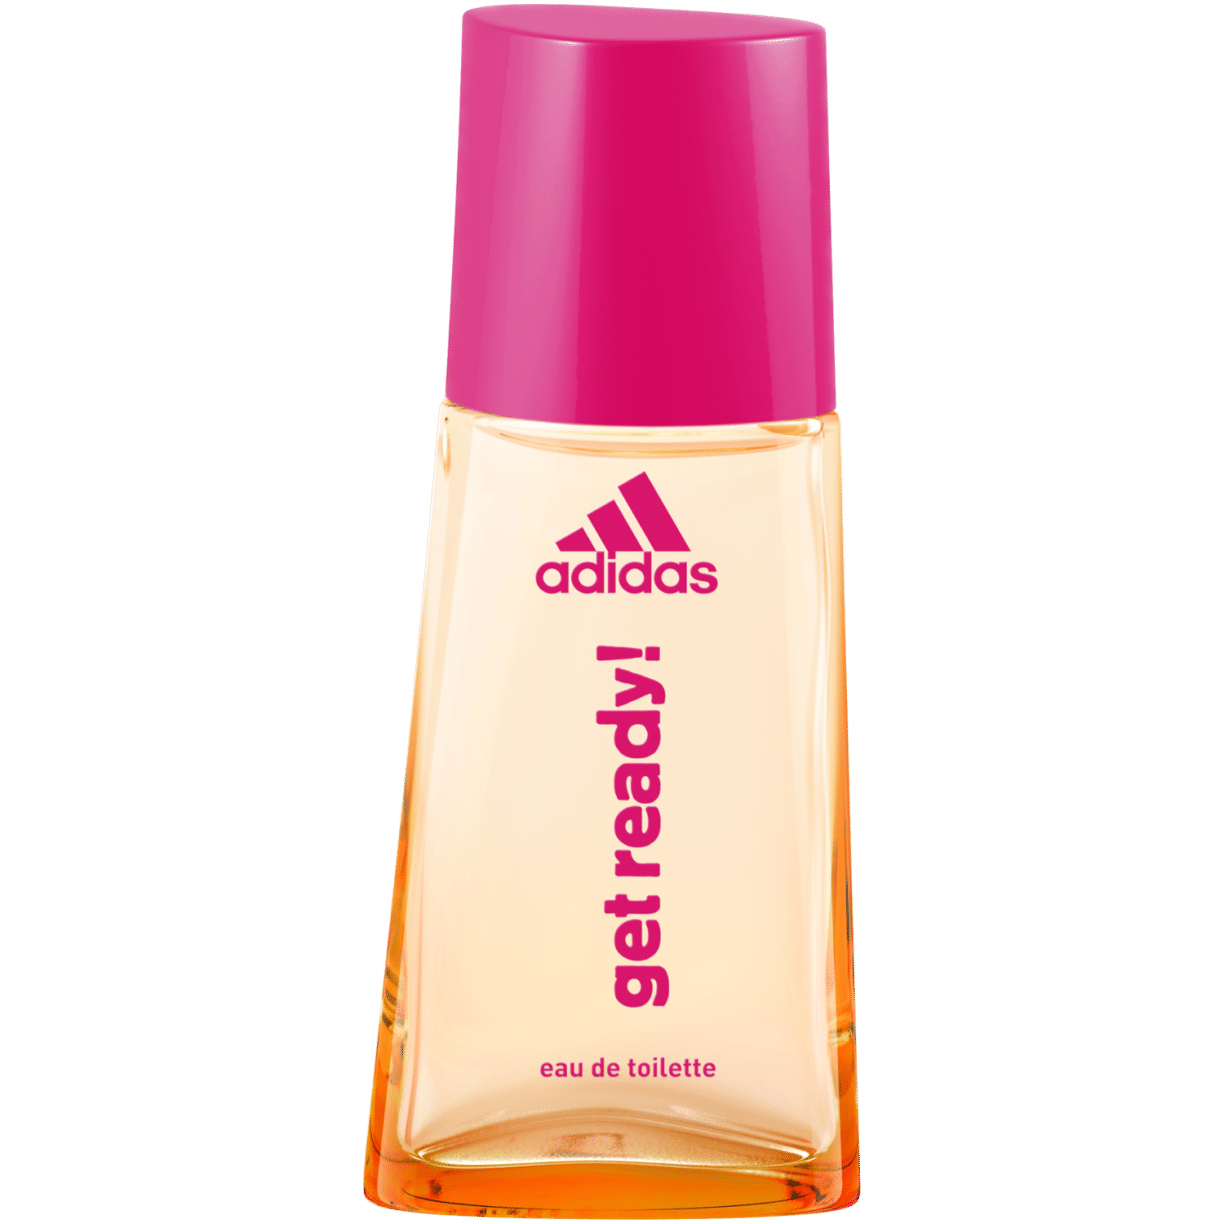 Adidas get ready for her perfume